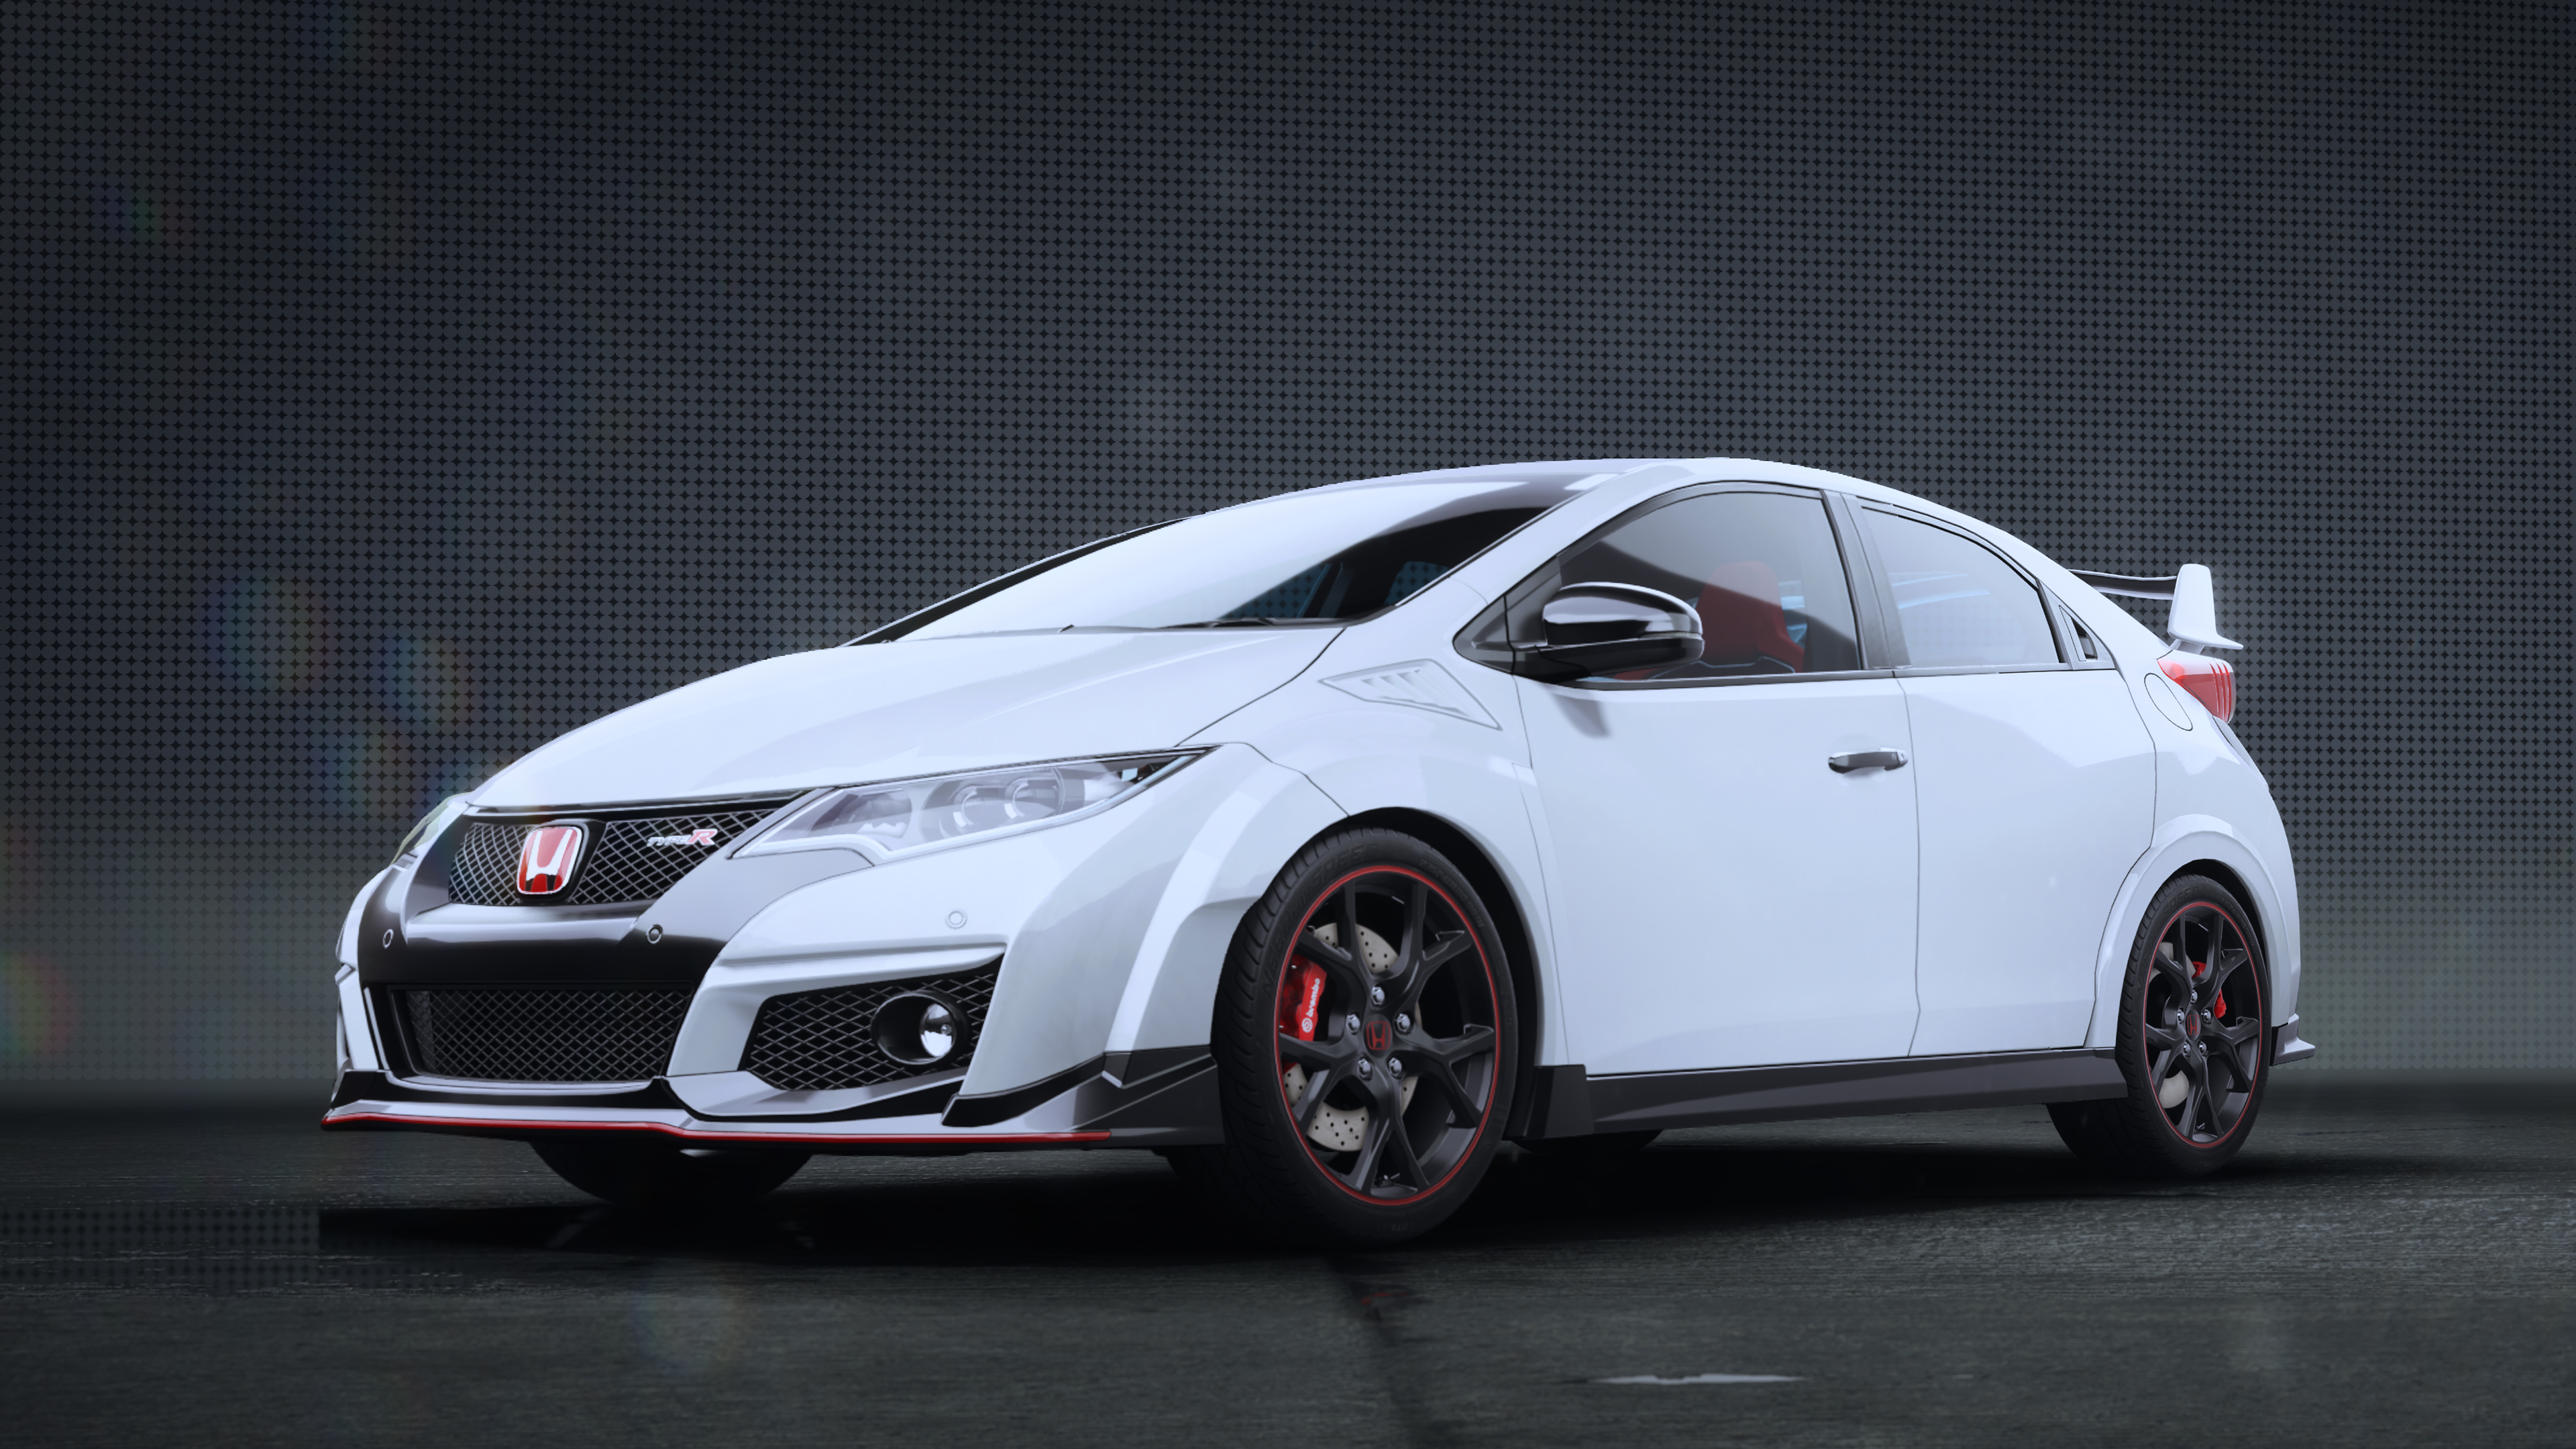 Honda Civic Type R Prototype Will Have US Debut On July 1 At Mid-Ohio